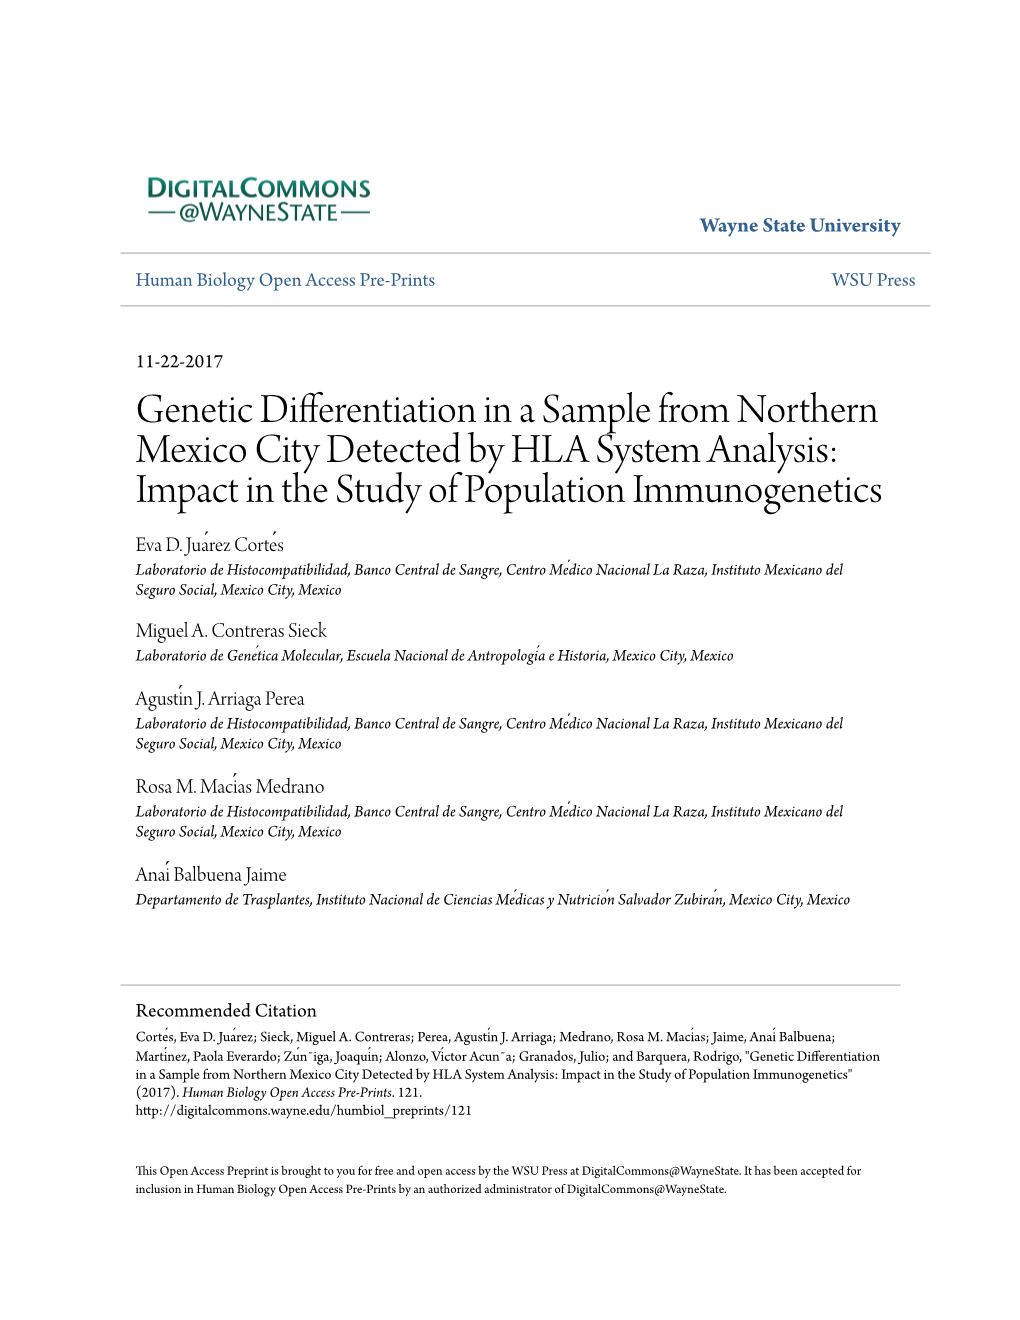 Genetic Differentiation in a Sample from Northern Mexico City Detected by HLA System Analysis: Impact in the Study of Population Immunogenetics Eva D